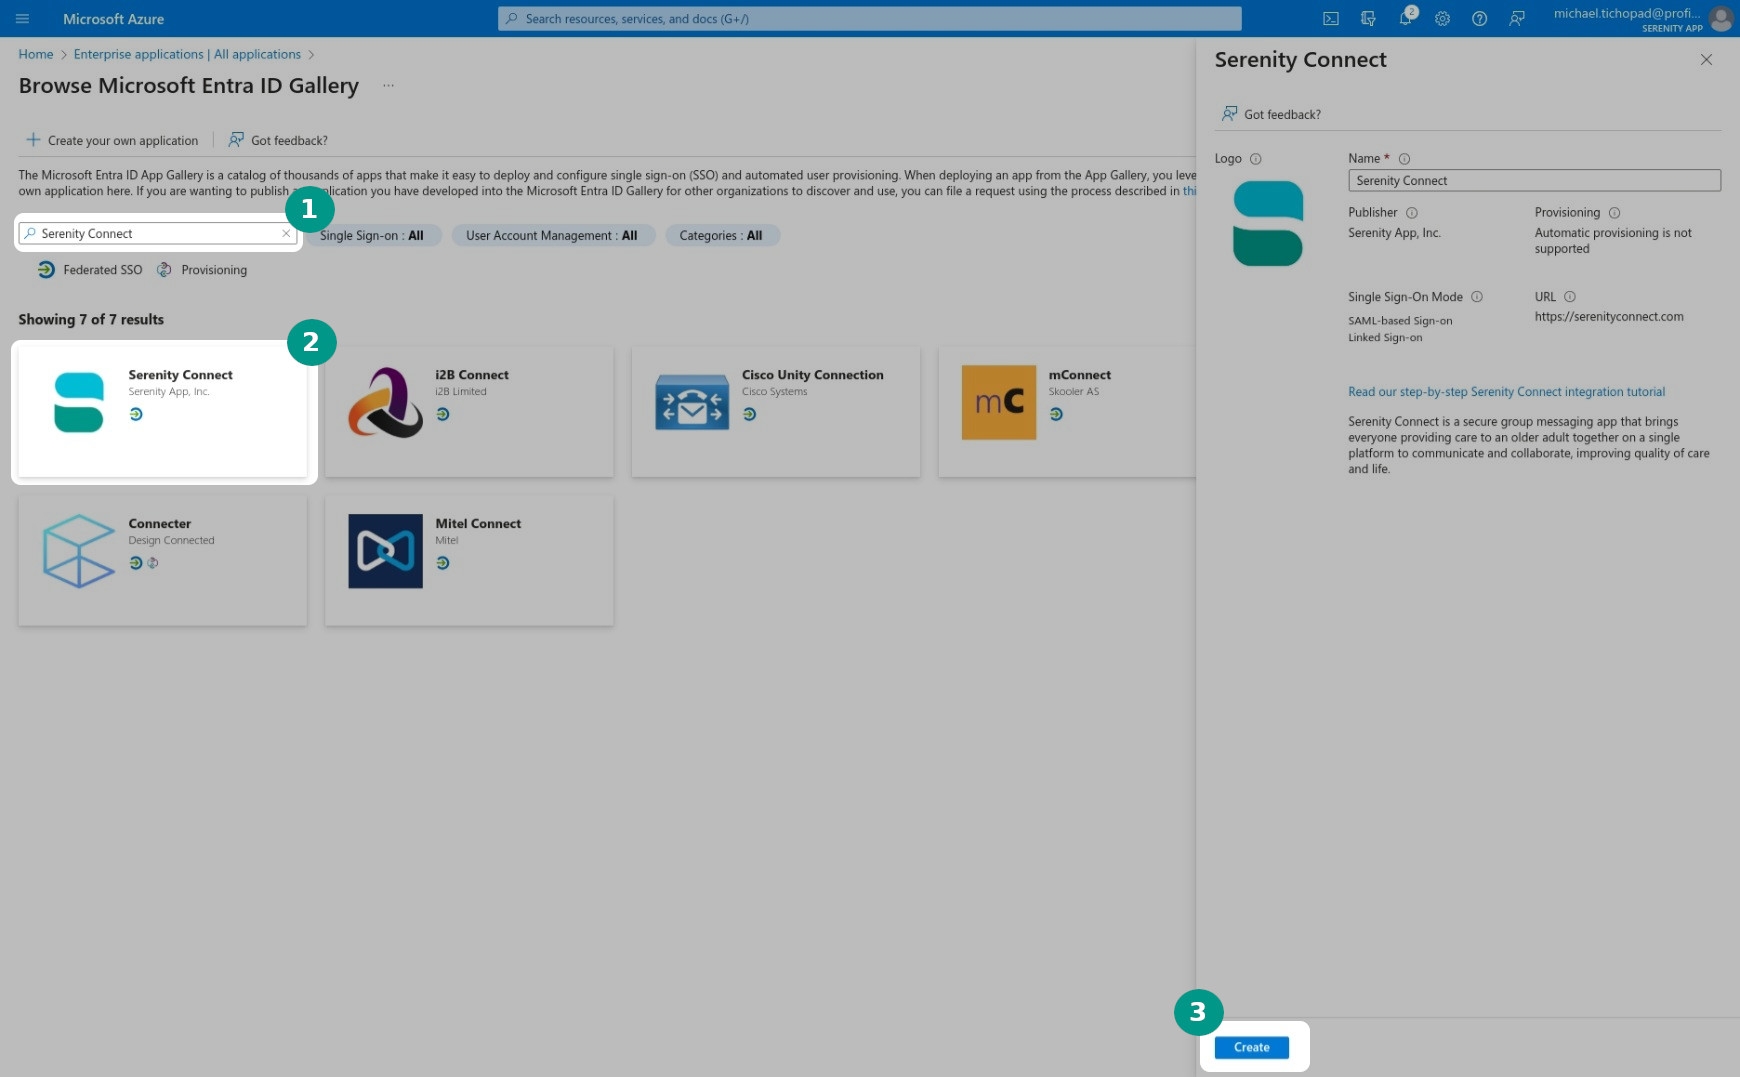 Installing Serenity Connect enterprise application through Entra ID Gallery